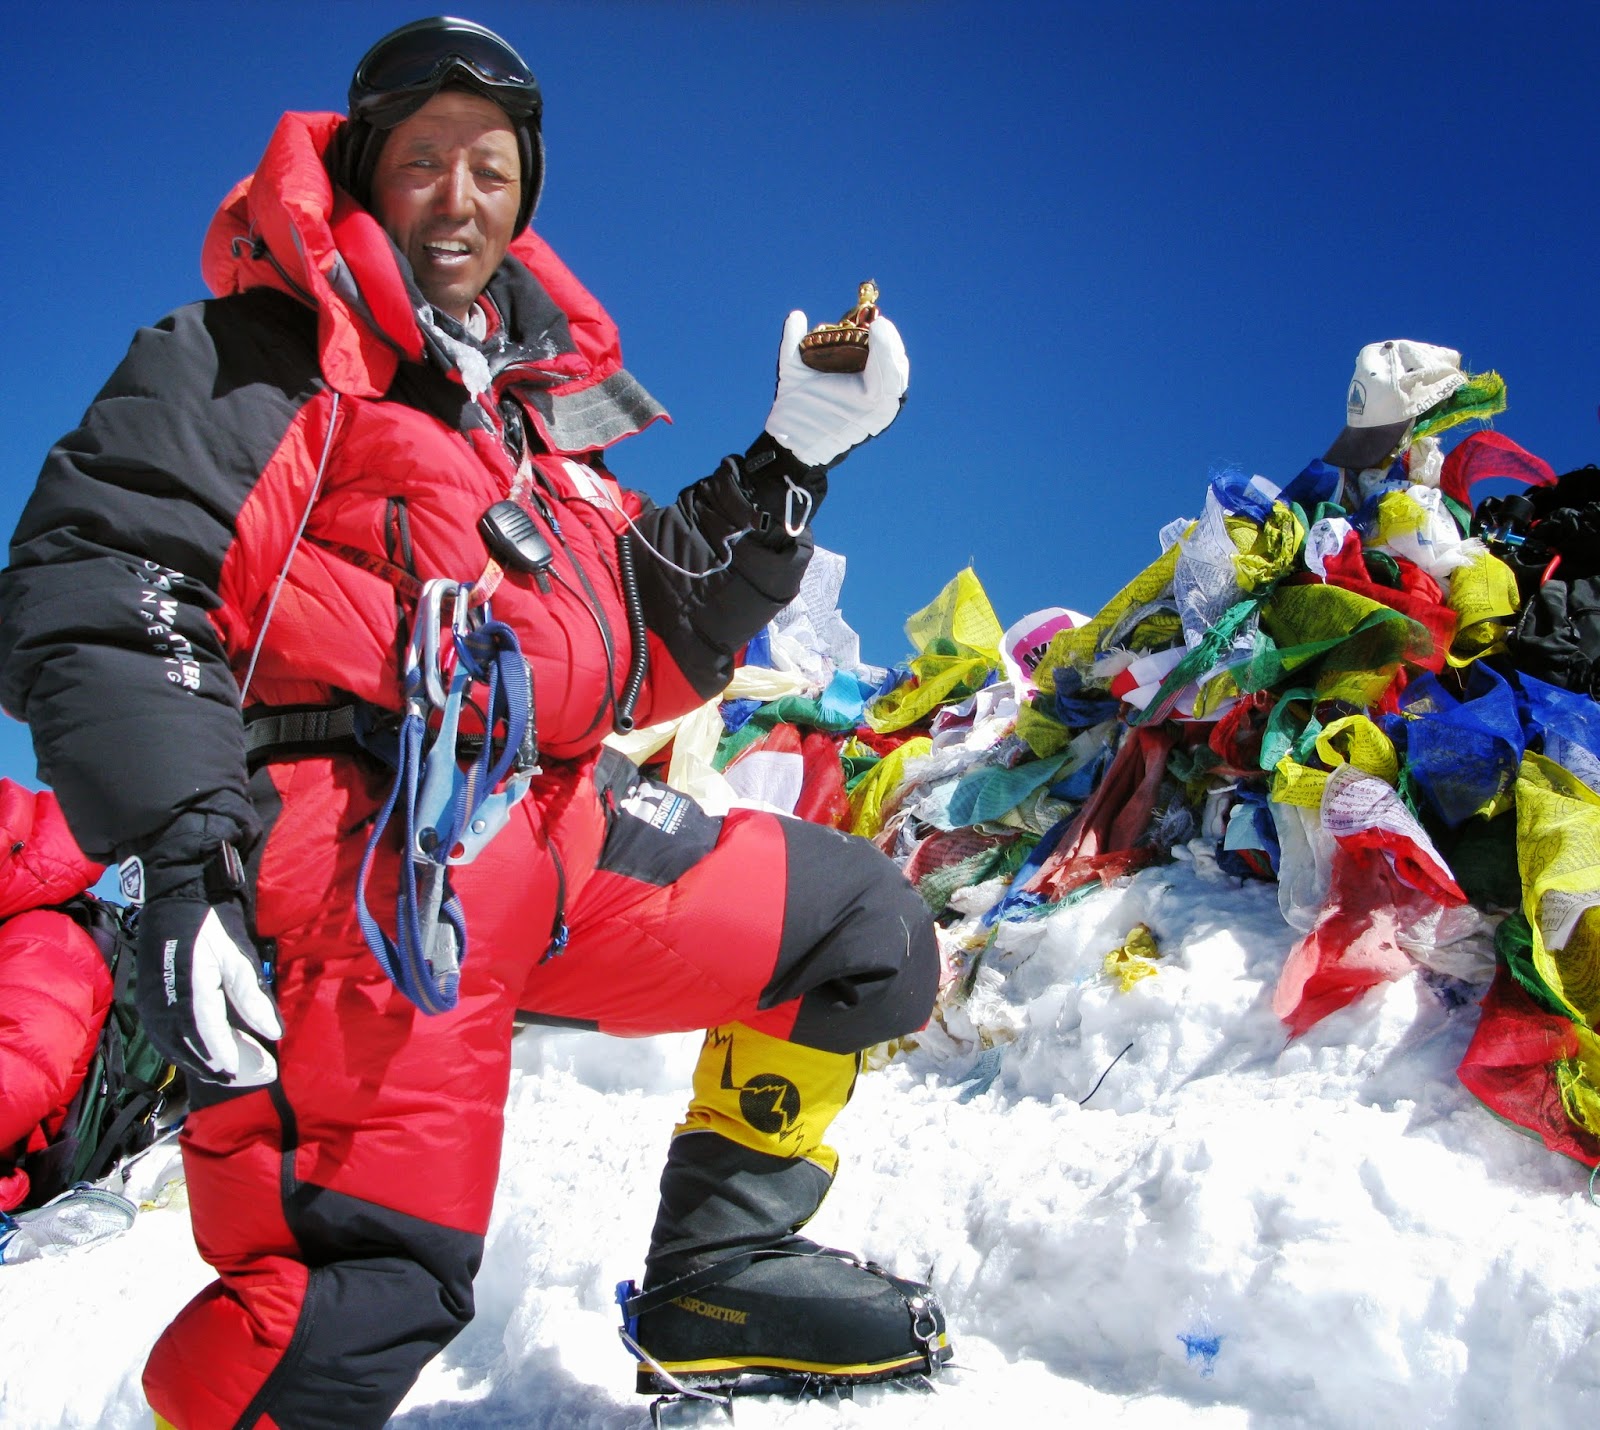 Apa Sherpa on the summit of Everest with a memorial to Sir Edmund Hillary who passed away in 2008. Photo credit: Apa Sherpa Foundation